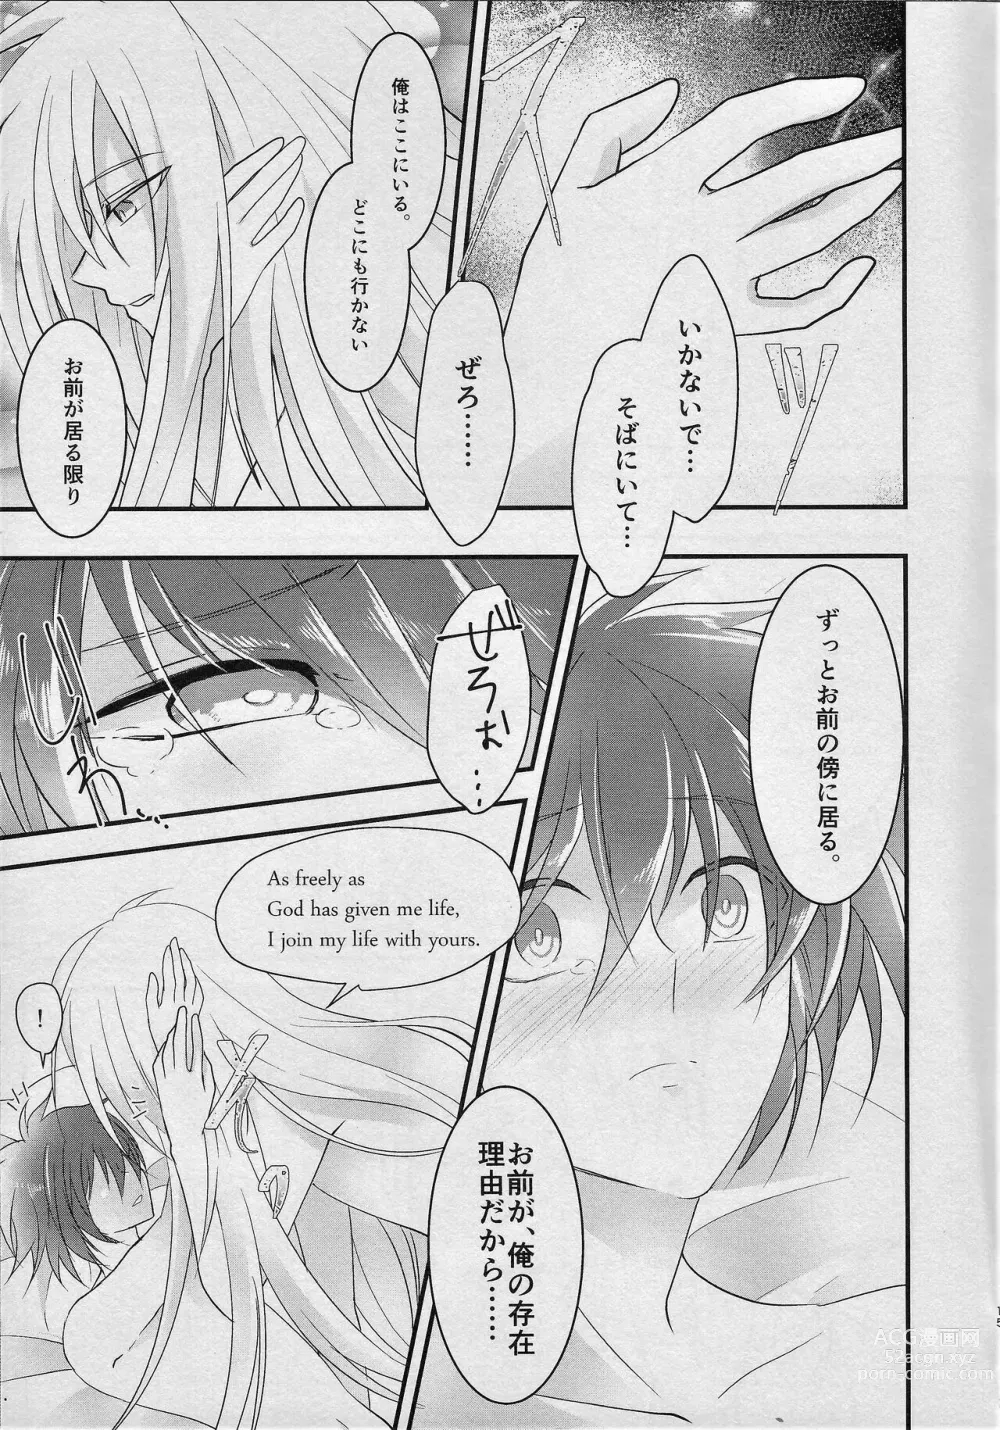 Page 14 of doujinshi JUST MARRIED